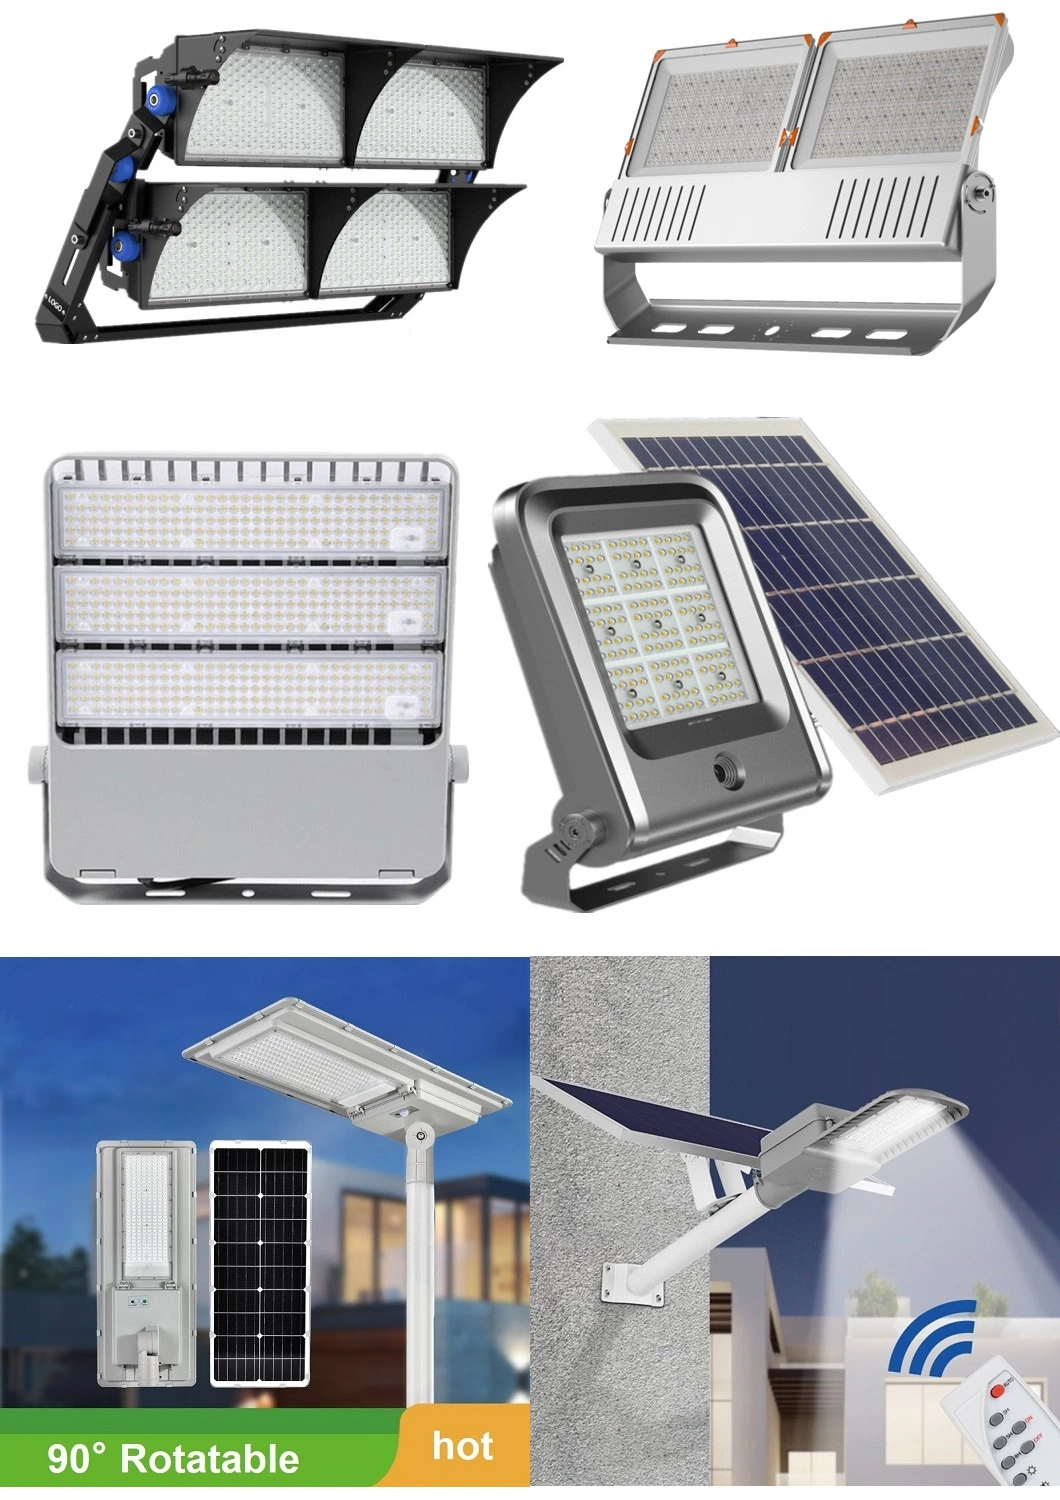 High Quality Bright Lighting LED Lamp Solar Flood Lights for Camping